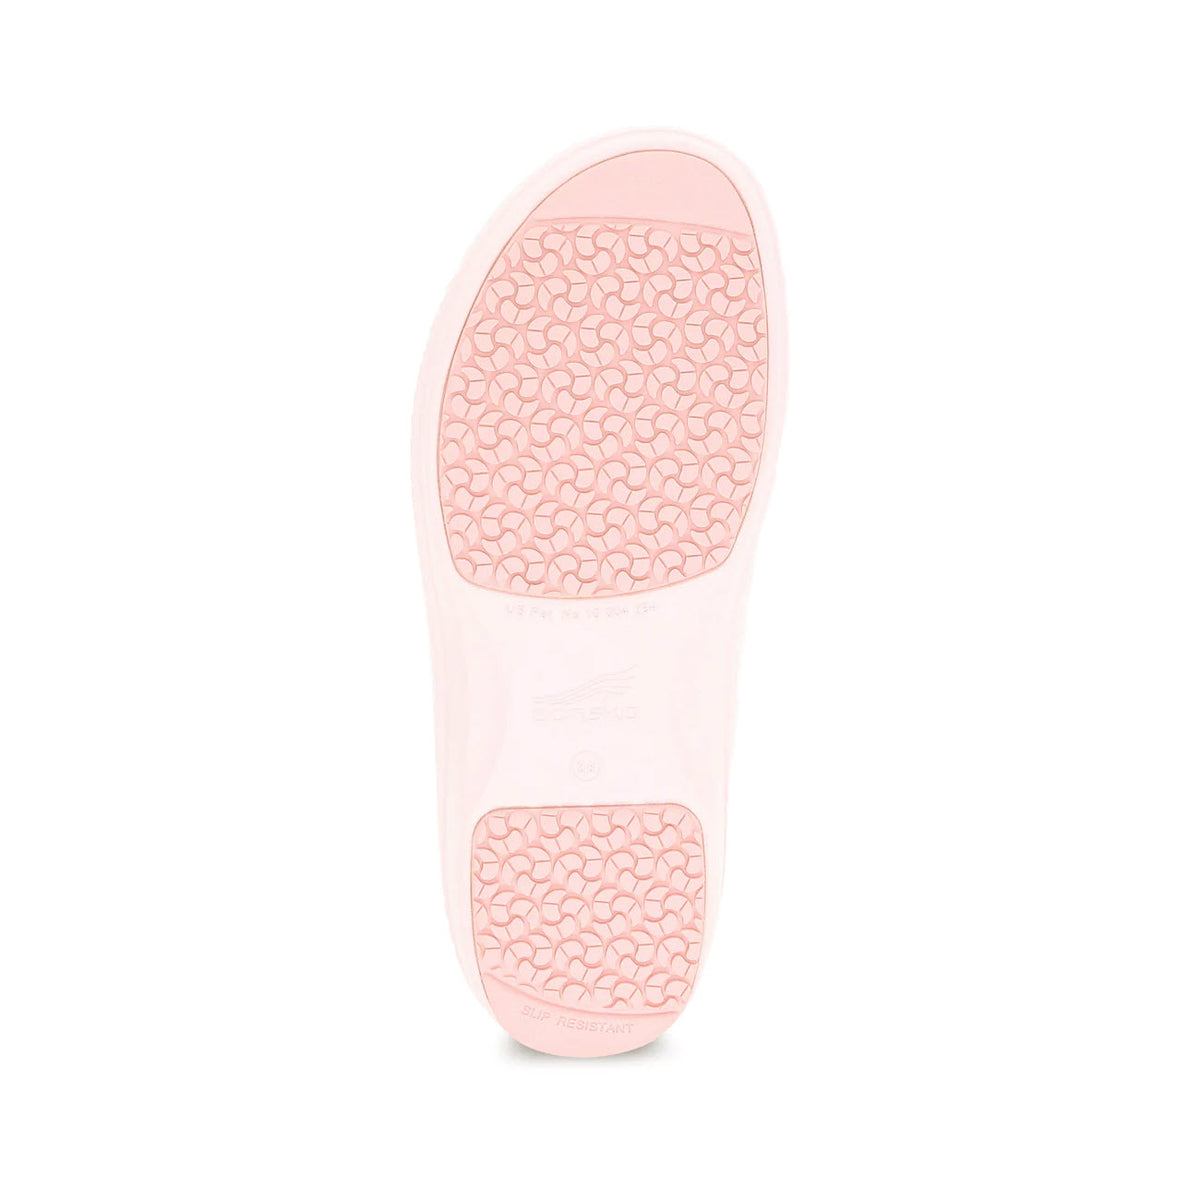 Sole of a DANSKO KACI PINK - WOMENS shoe with a slip-resistant rubber outsole and brand markings, viewed from below against a white background.